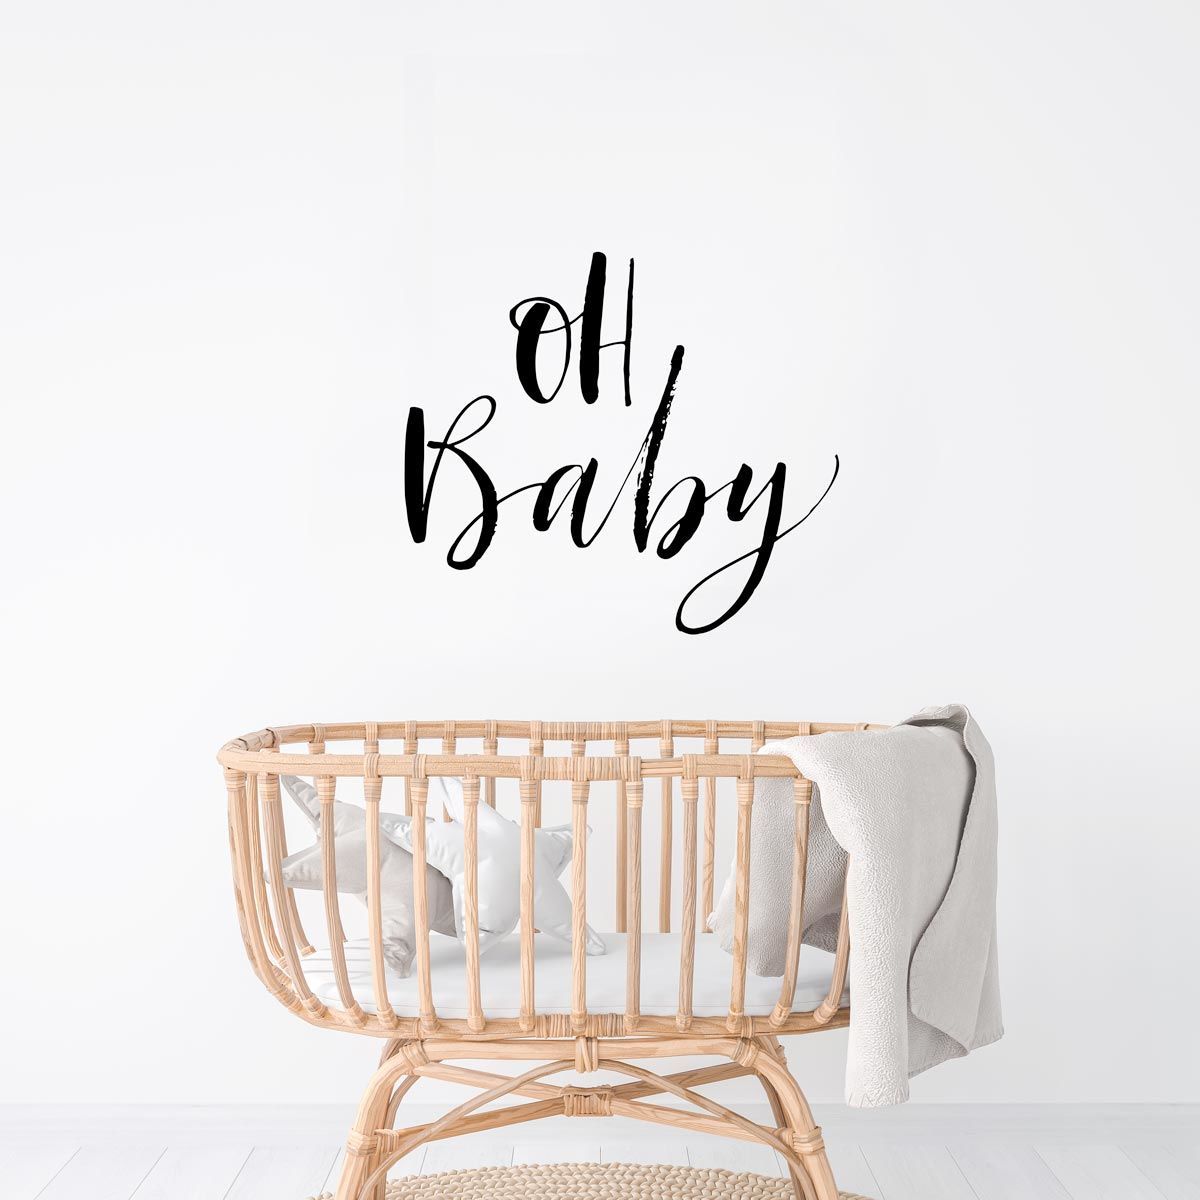 sticker-mural-Oh-baby-2